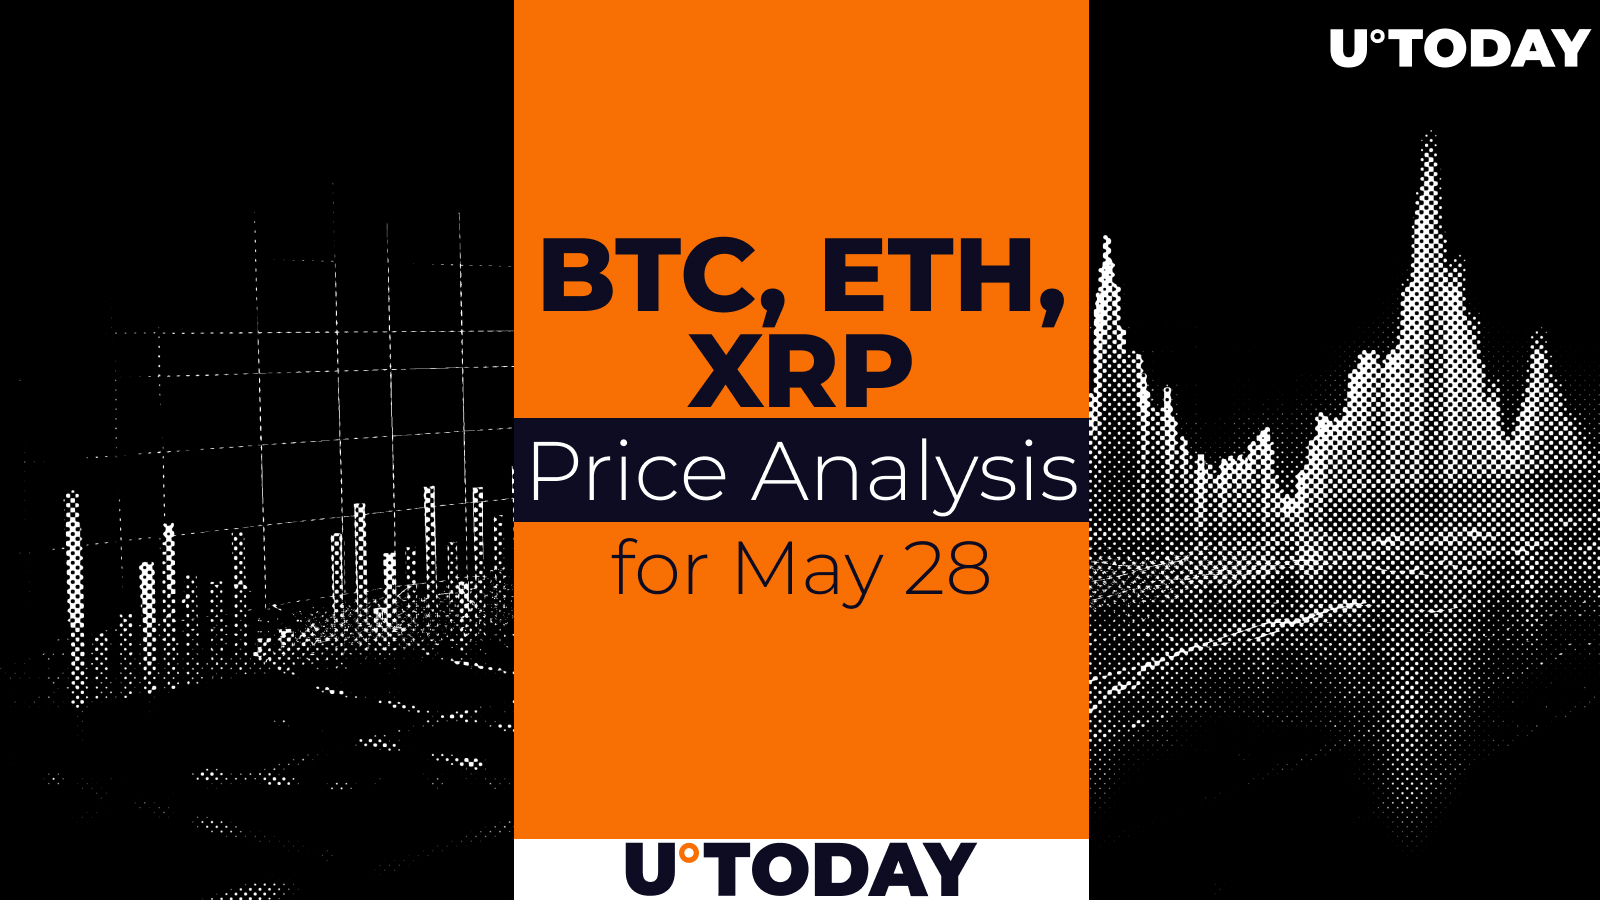 BTC, ETH and XRP Price Prediction for May 28